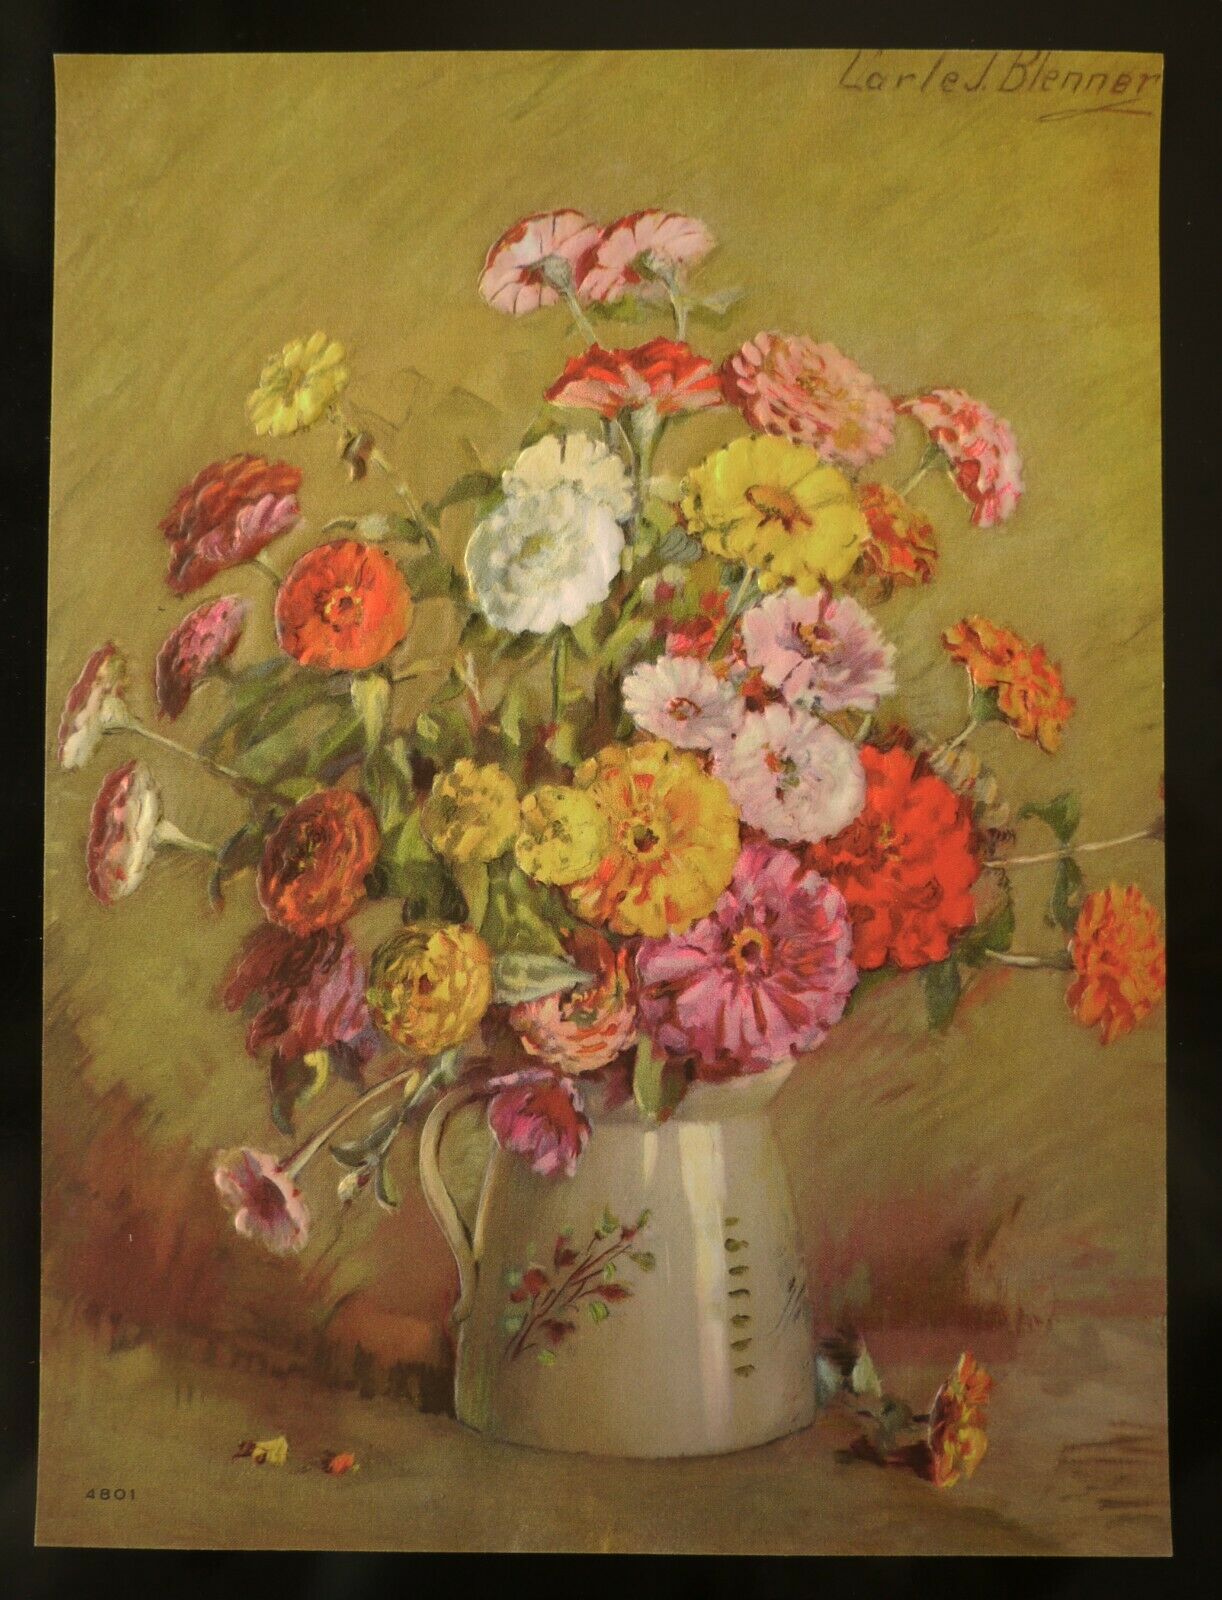 C Blenner, Brown & Bigelow Vintage Litho Print 10x7.5" Zinnia Bouquet In Pitcher